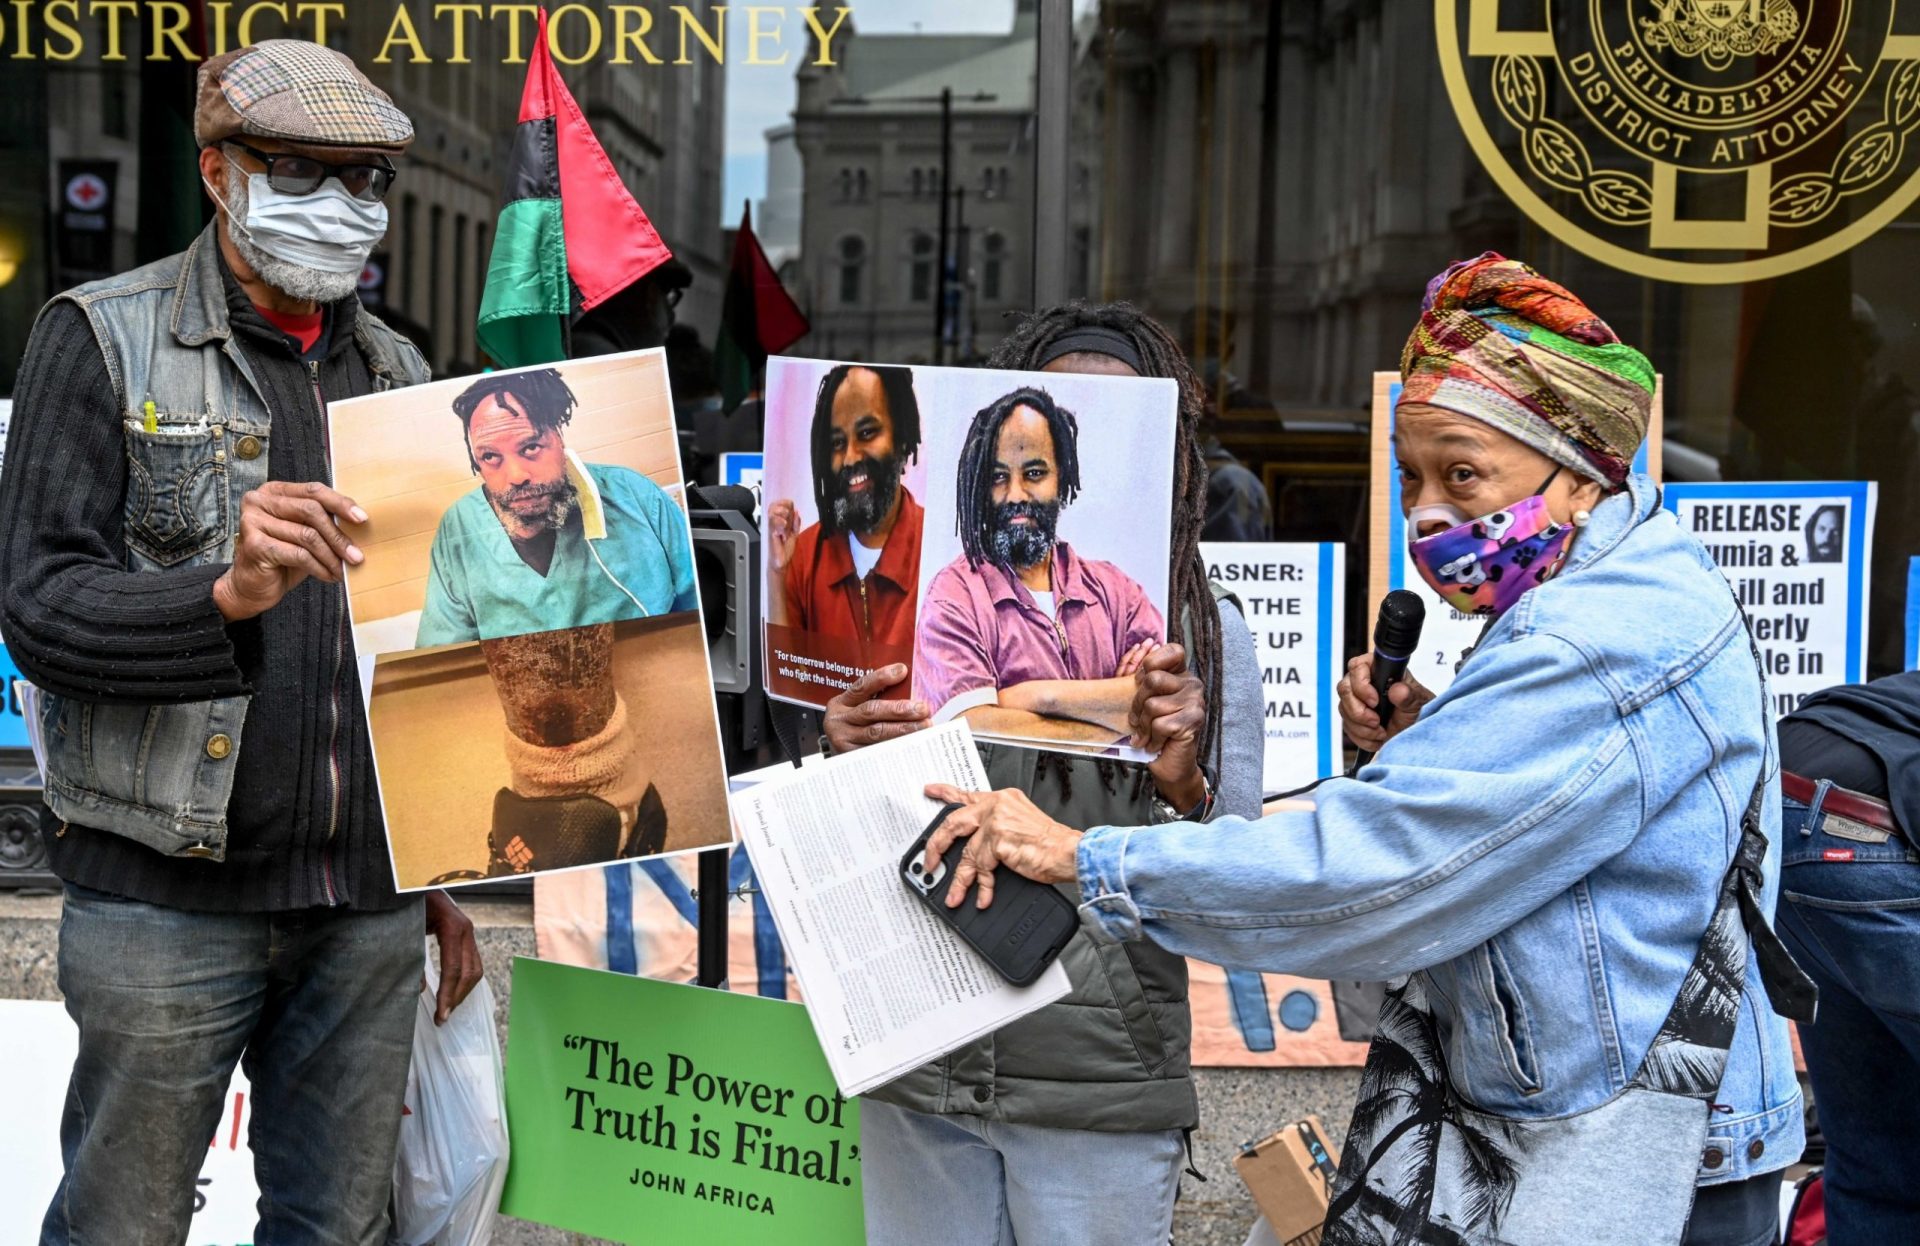 2022 may be the year that new evidence is released in the case of political prisoner Mumia Abu Jamal.